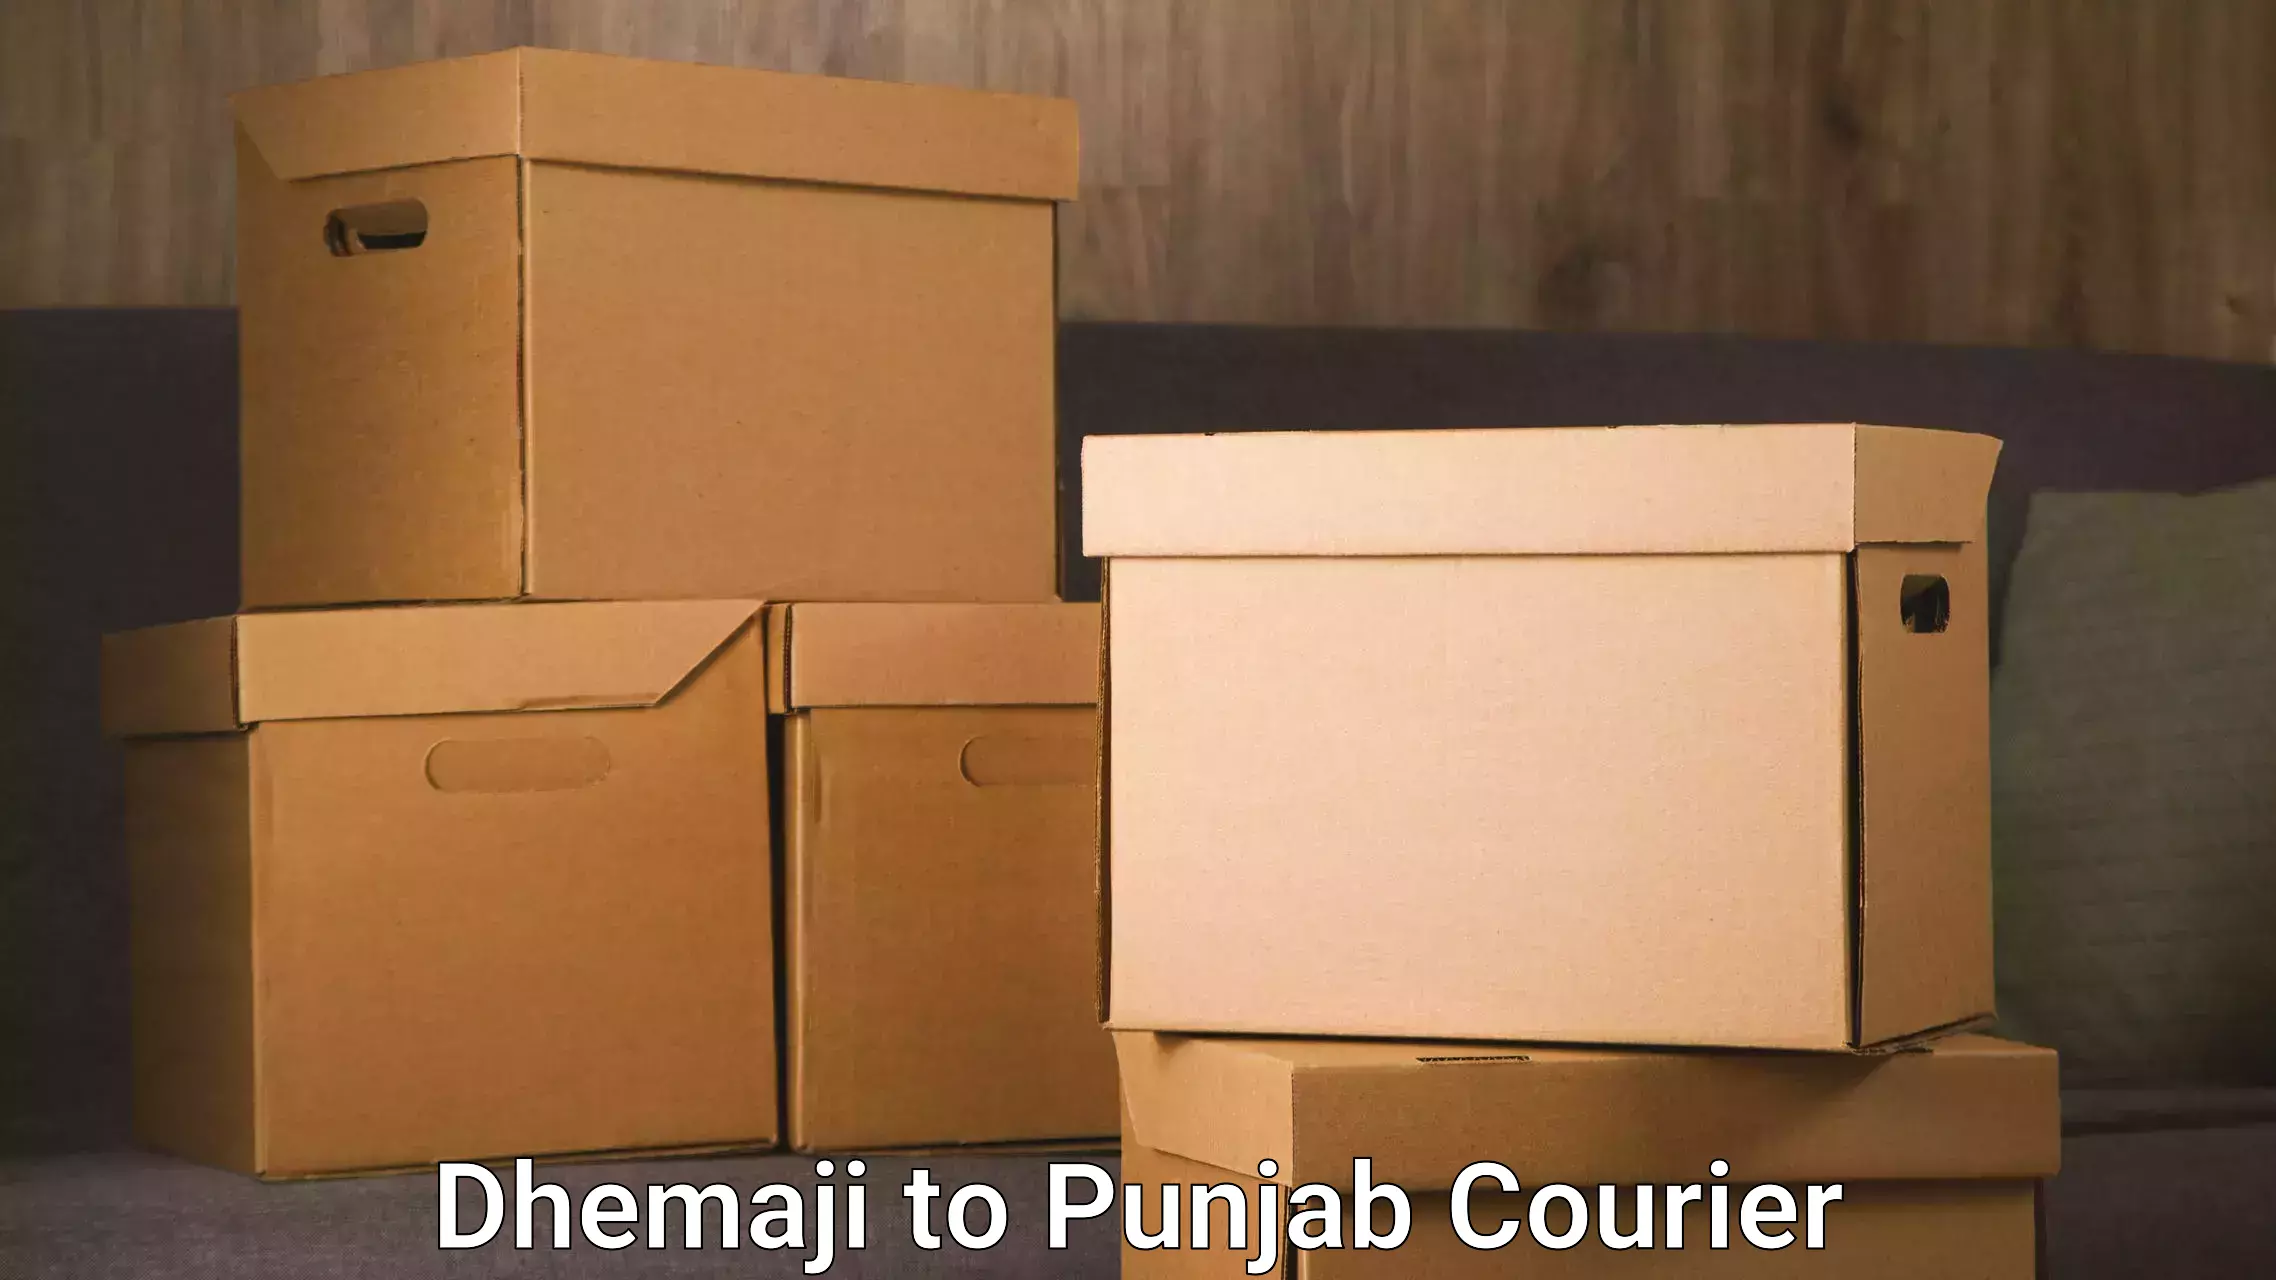 Global shipping solutions Dhemaji to Mohali